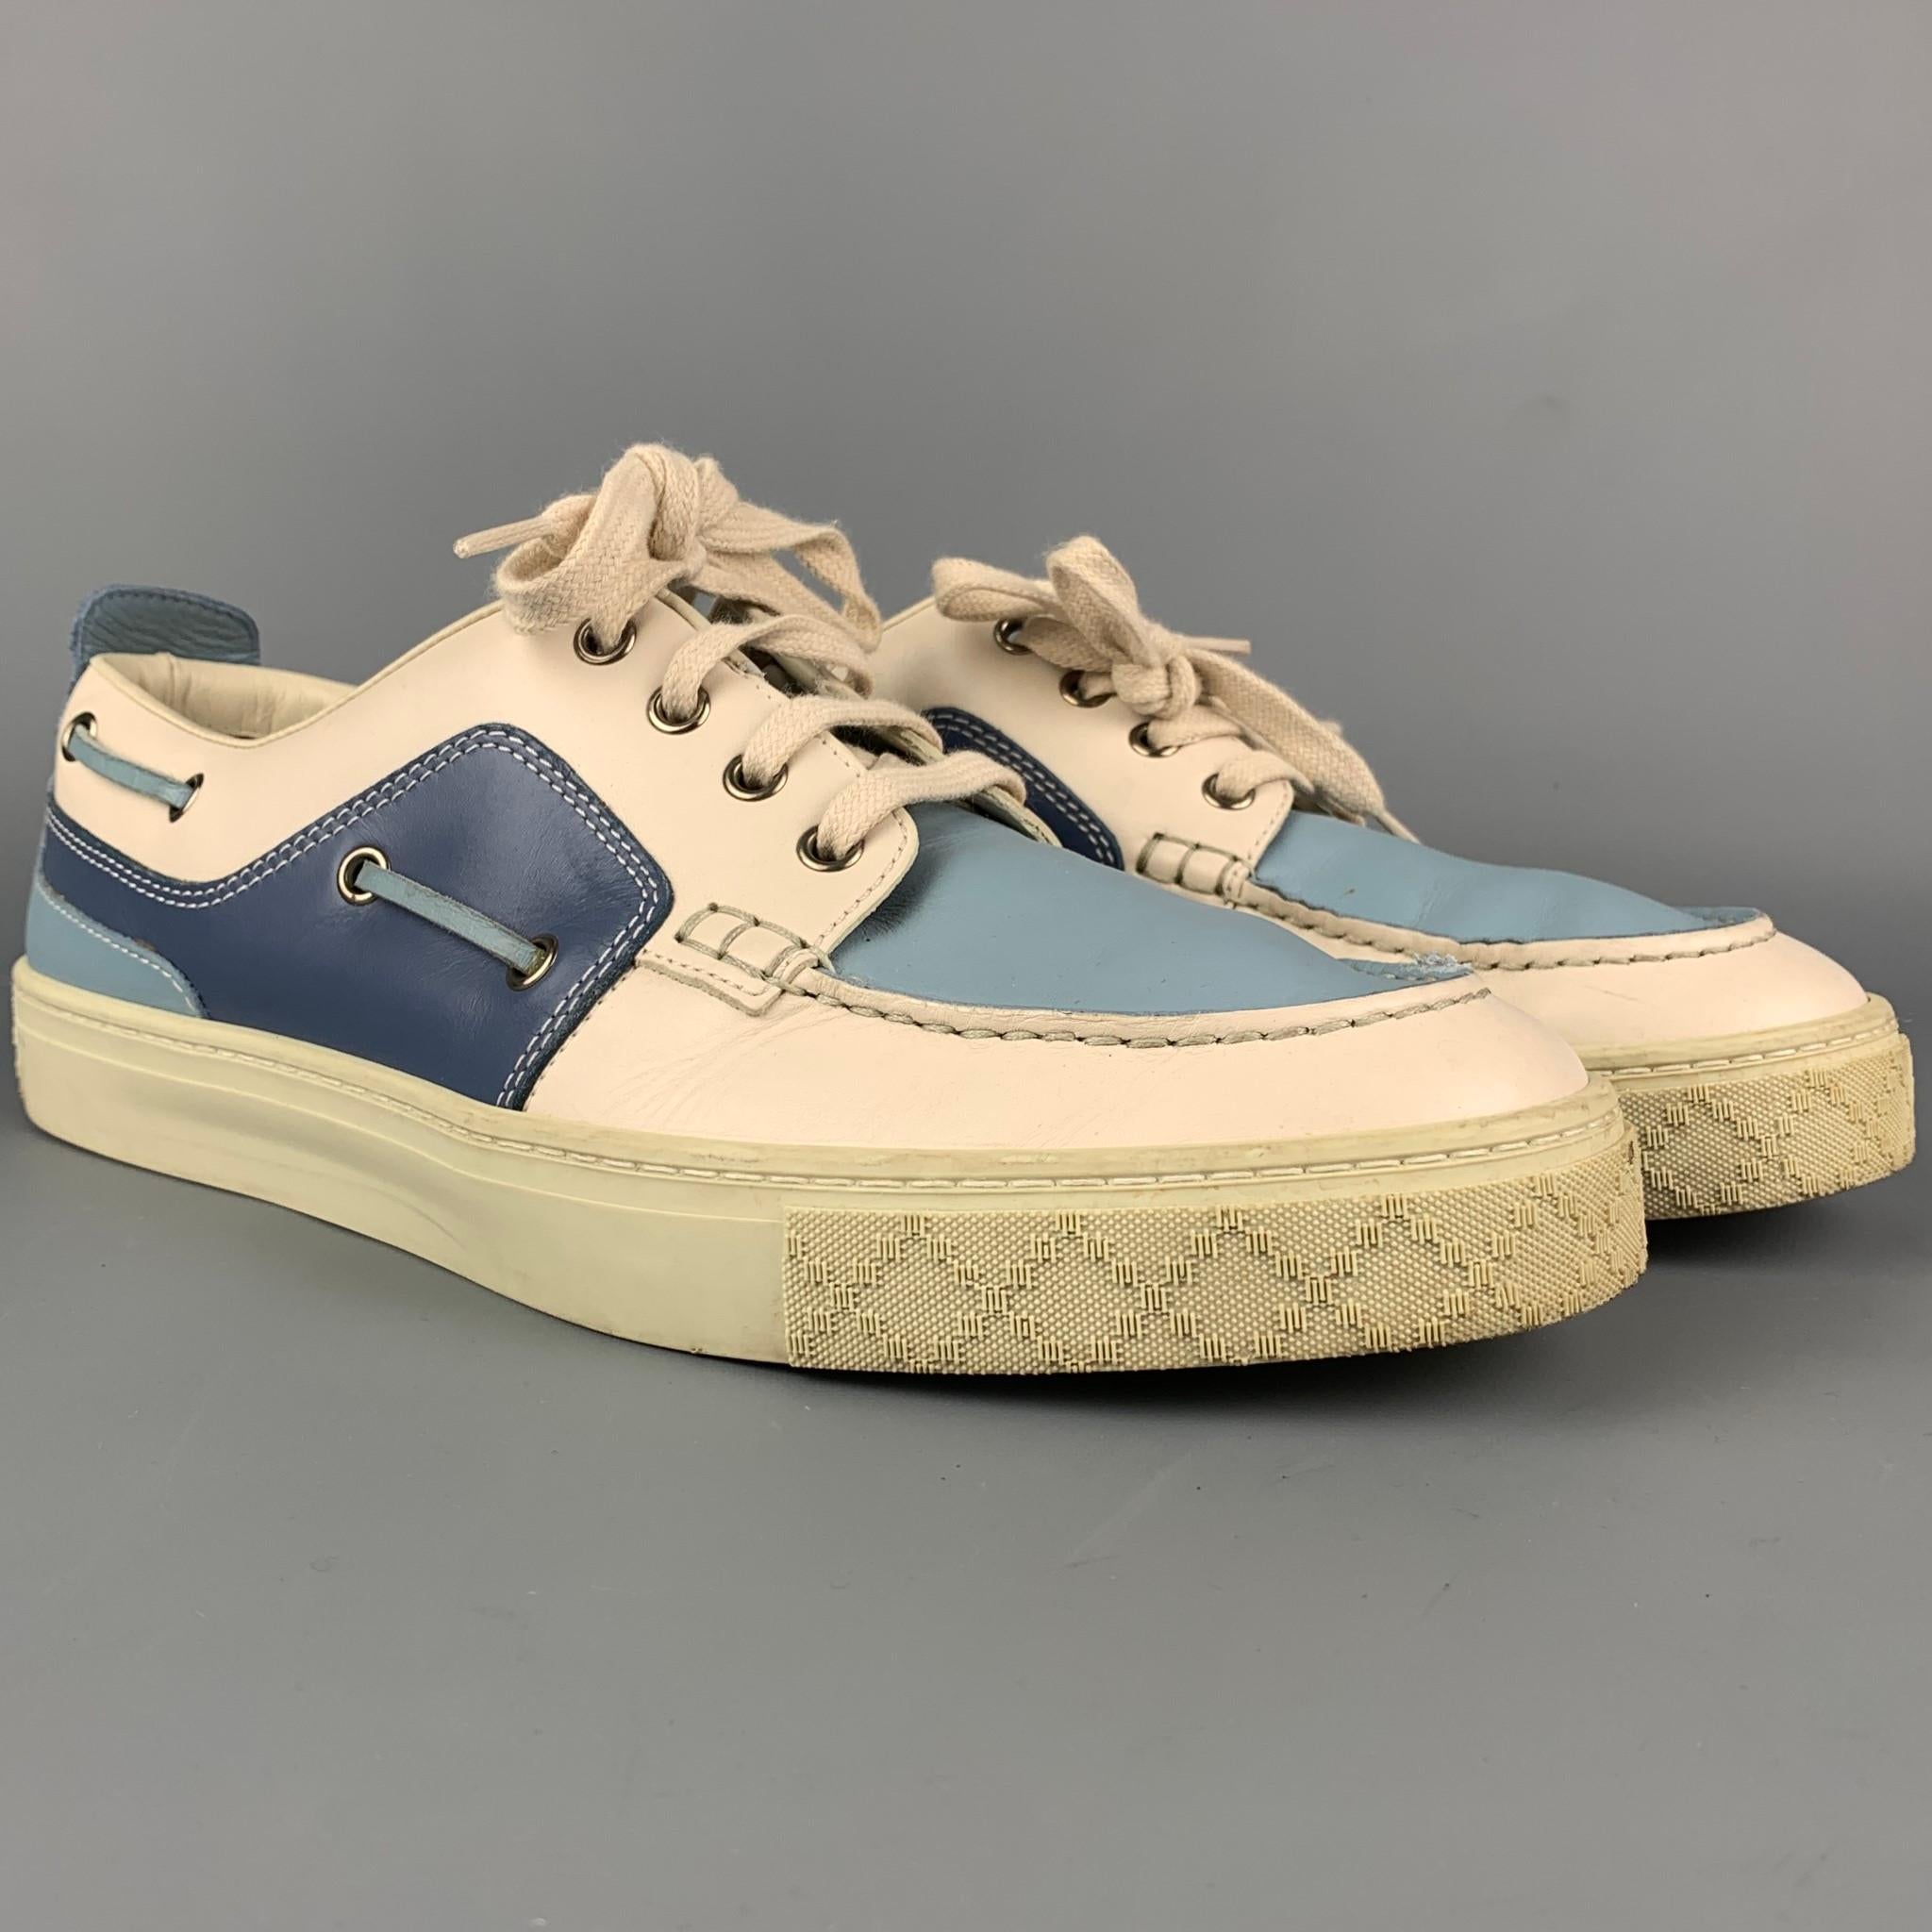 GUCCI sneakers comes in a blue & beige color black leather featuring a boat style, silver tone hardware, rubber sole, and a lace up closure. Made in Italy. 

Good Pre-Owned Condition. Minor wear throughout.
Marked: 308236 8 G
Original Retail Price: